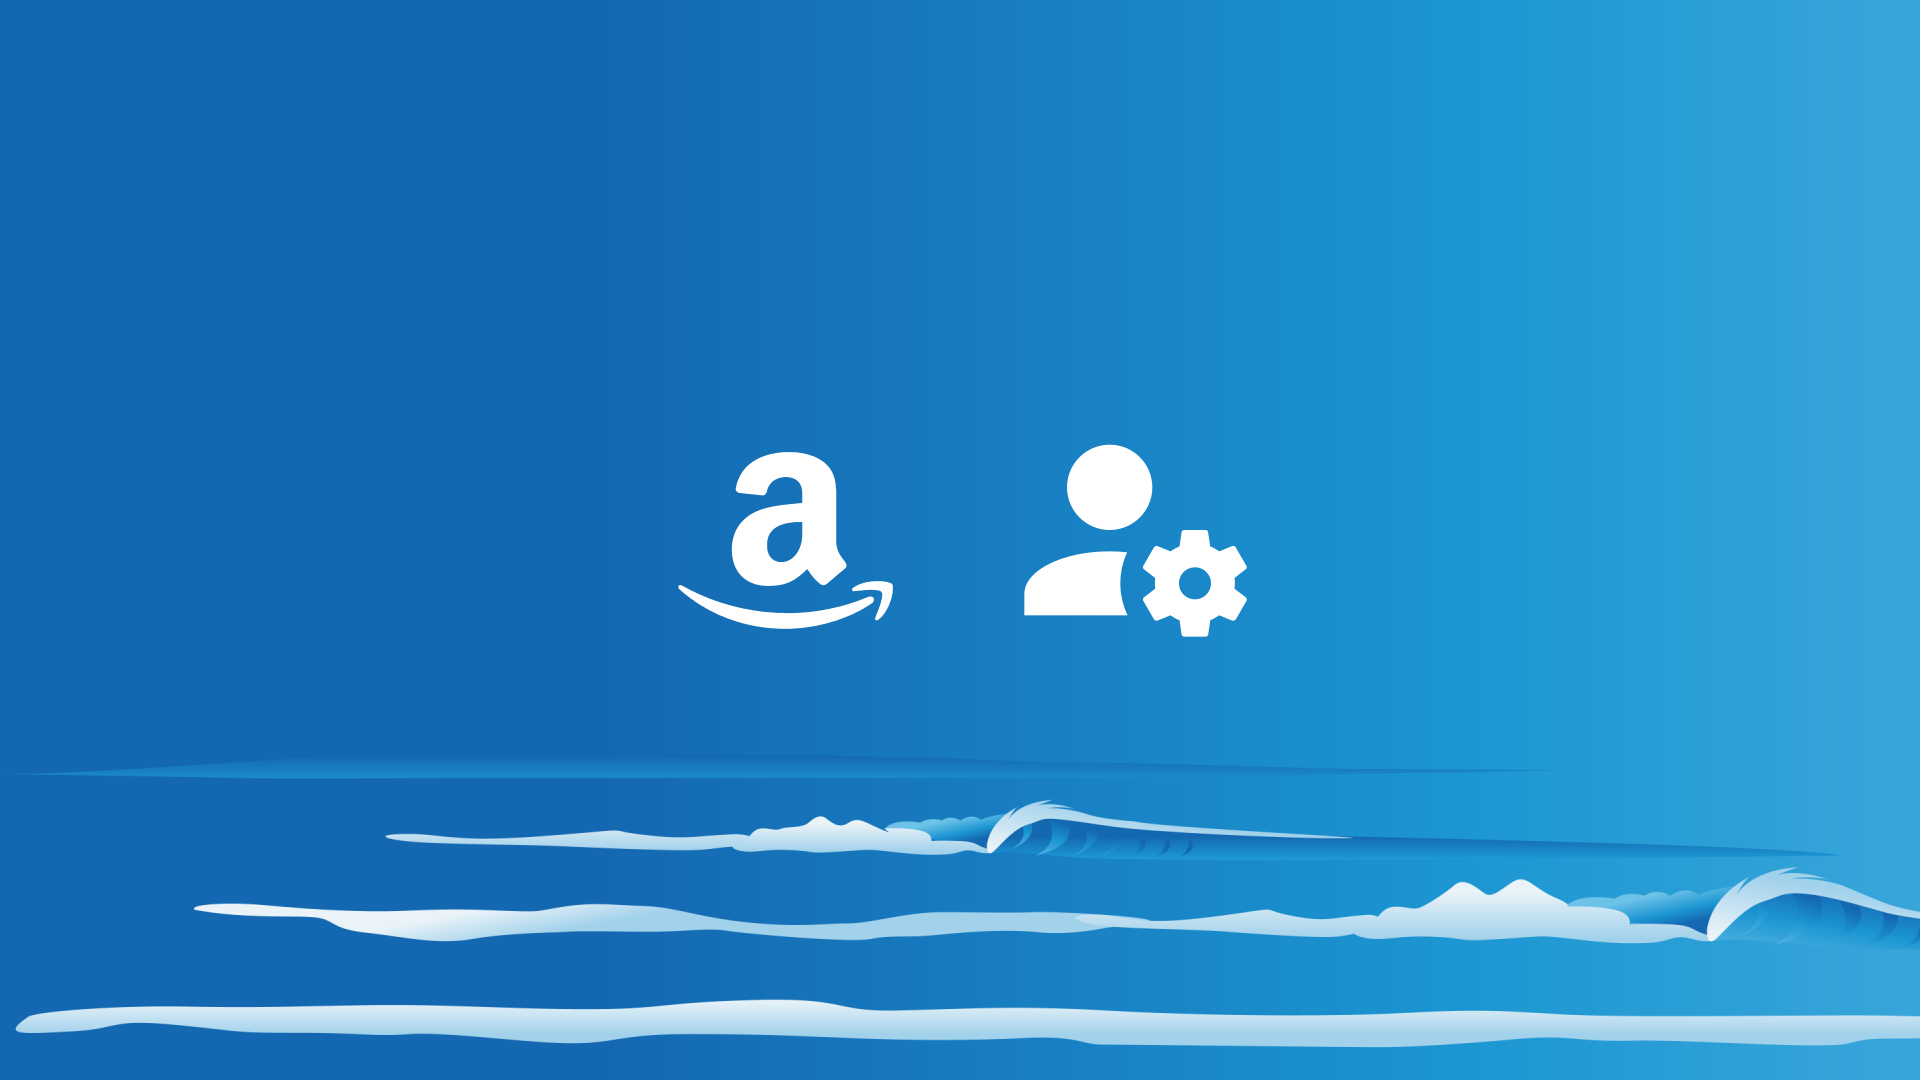 Sea background with Amazon logo and account settings icon